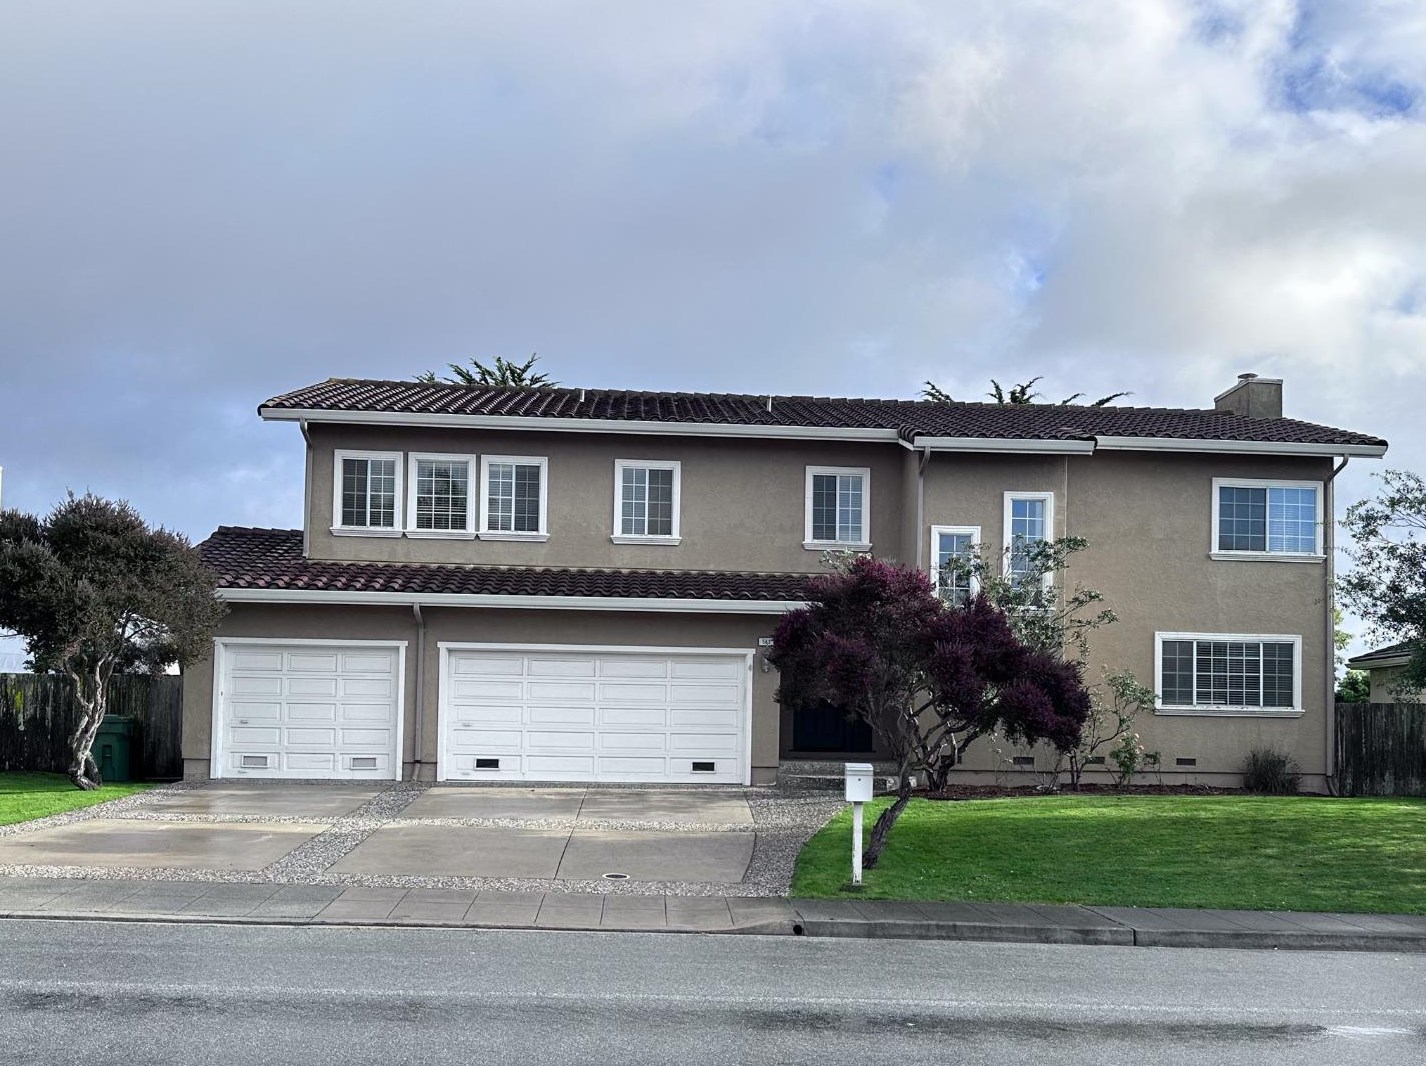 563 Highland Ave, Princeton by the Sea, CA 94019